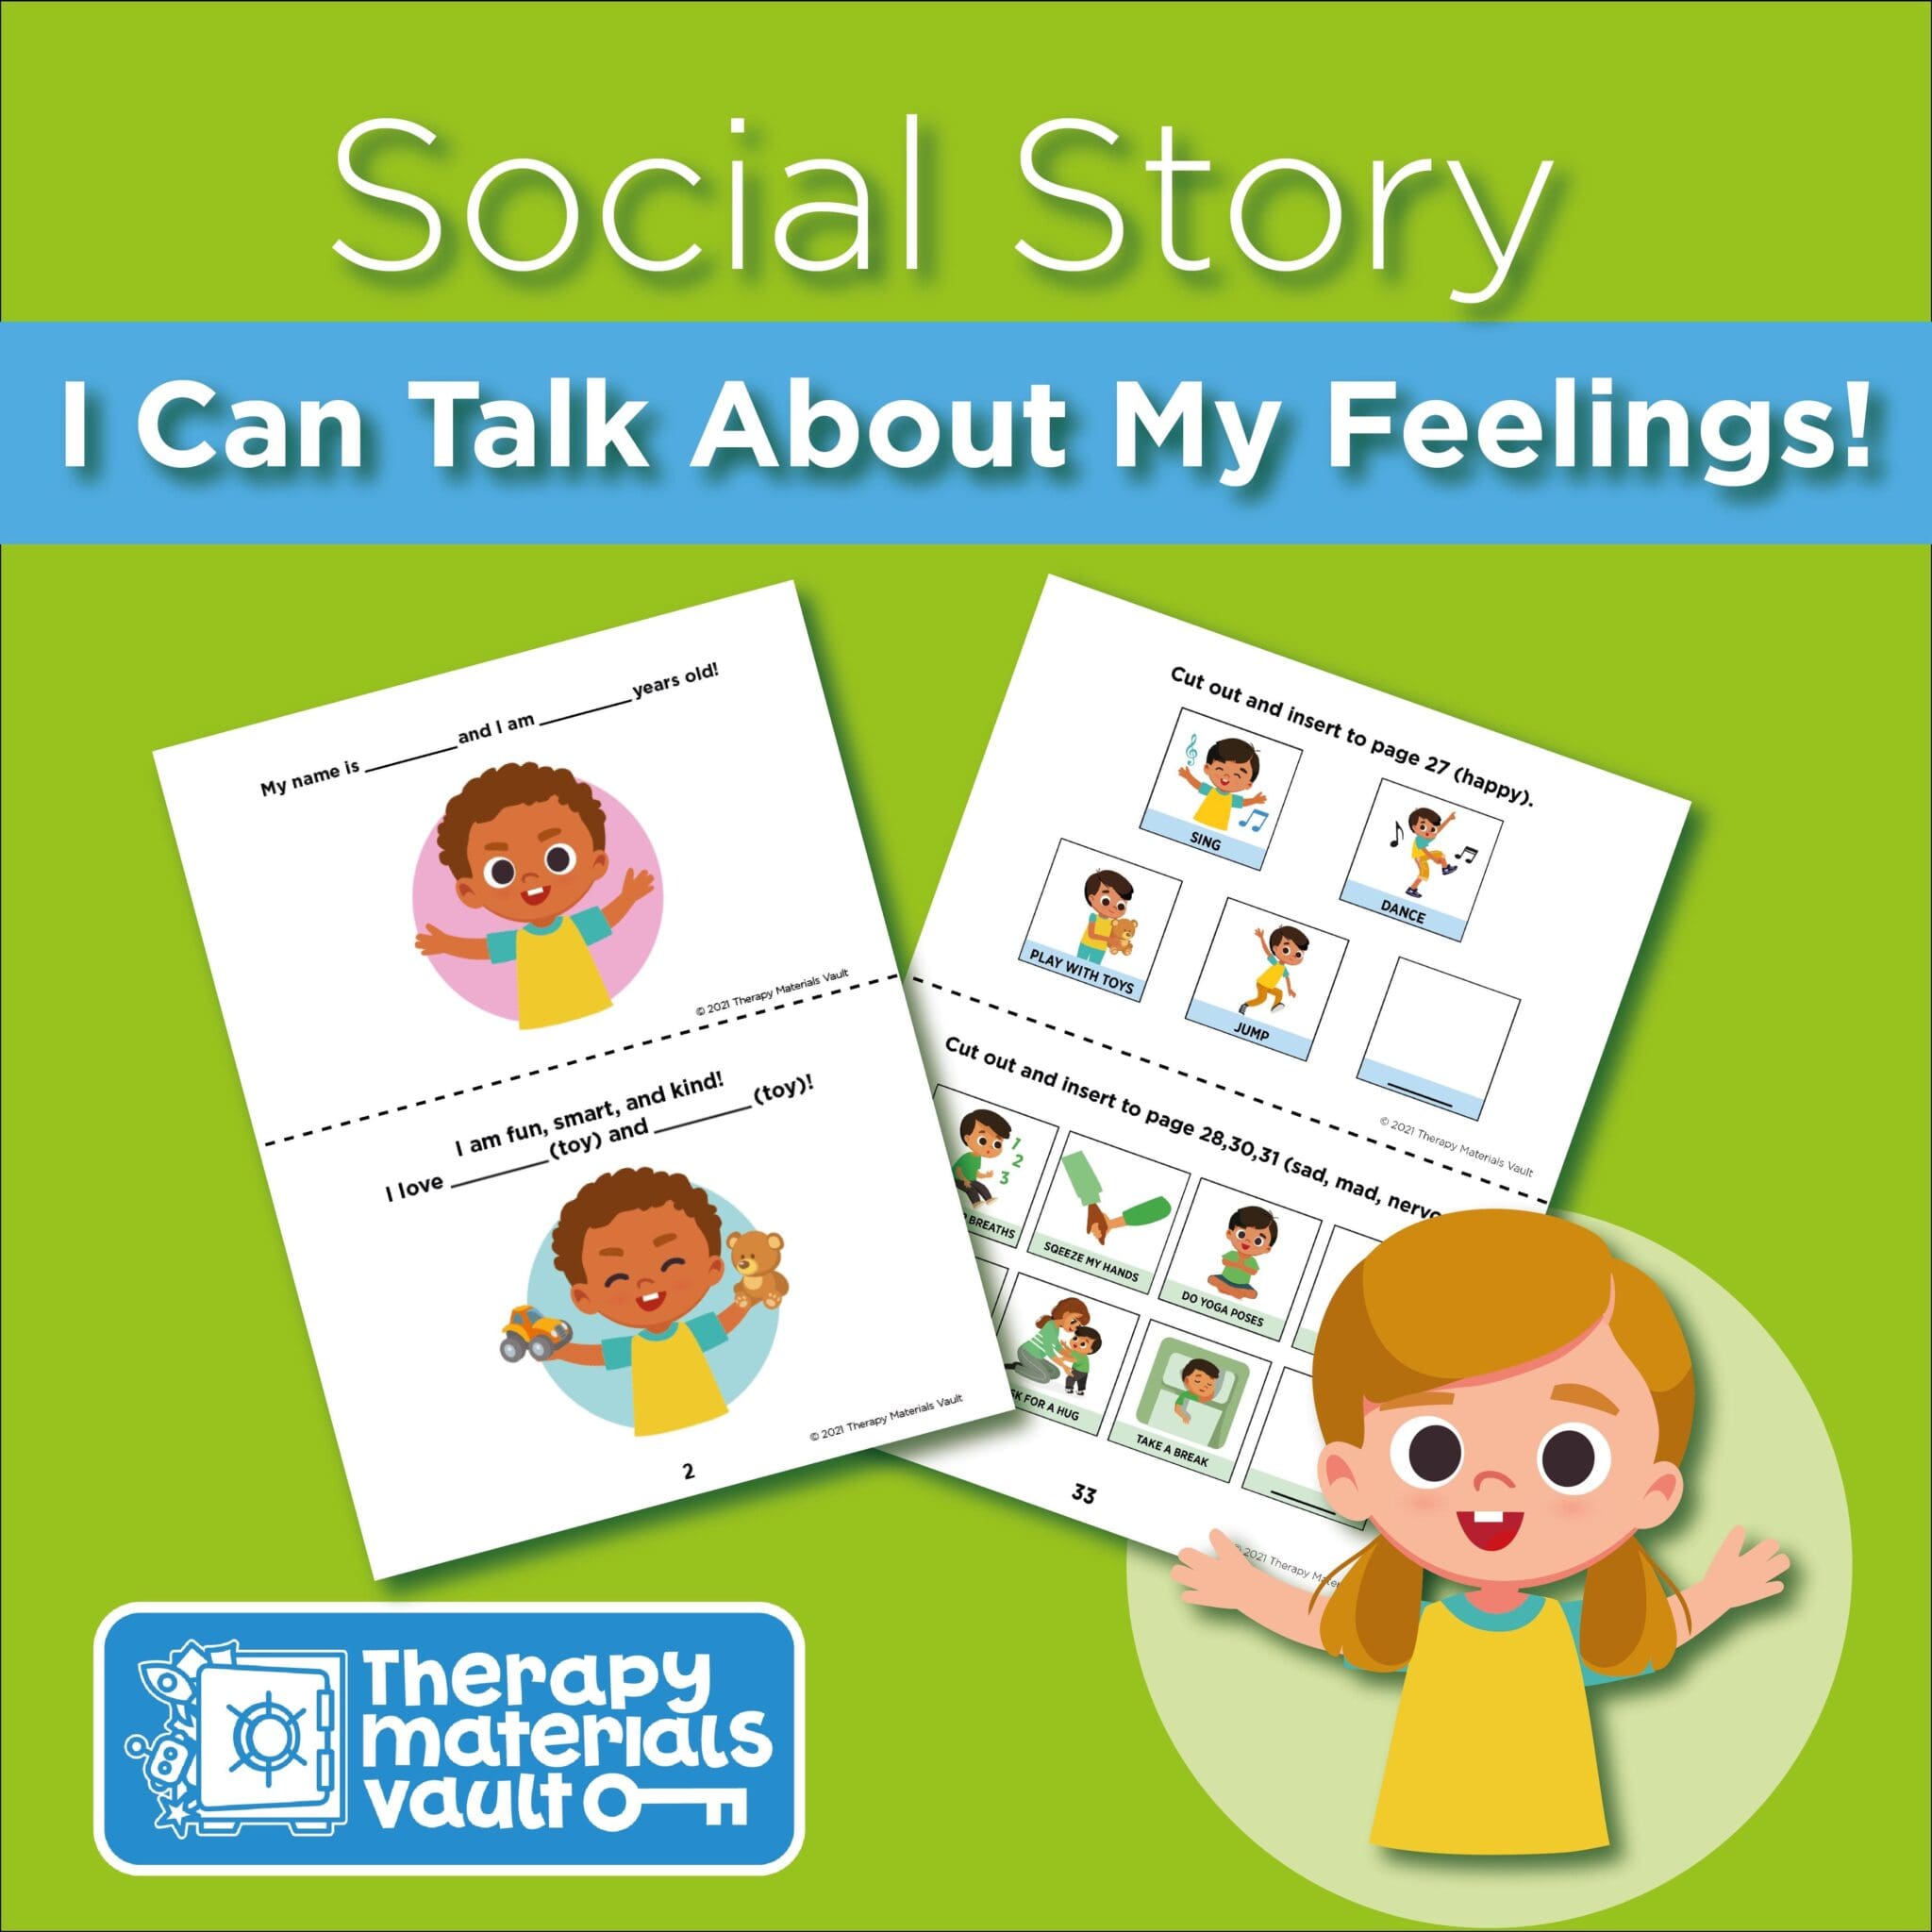 https://therapymaterialsvault.com/wp-content/uploads/2021/11/I-Can-Talk-About-My-Feelings-Social-Story-1-scaled.jpeg